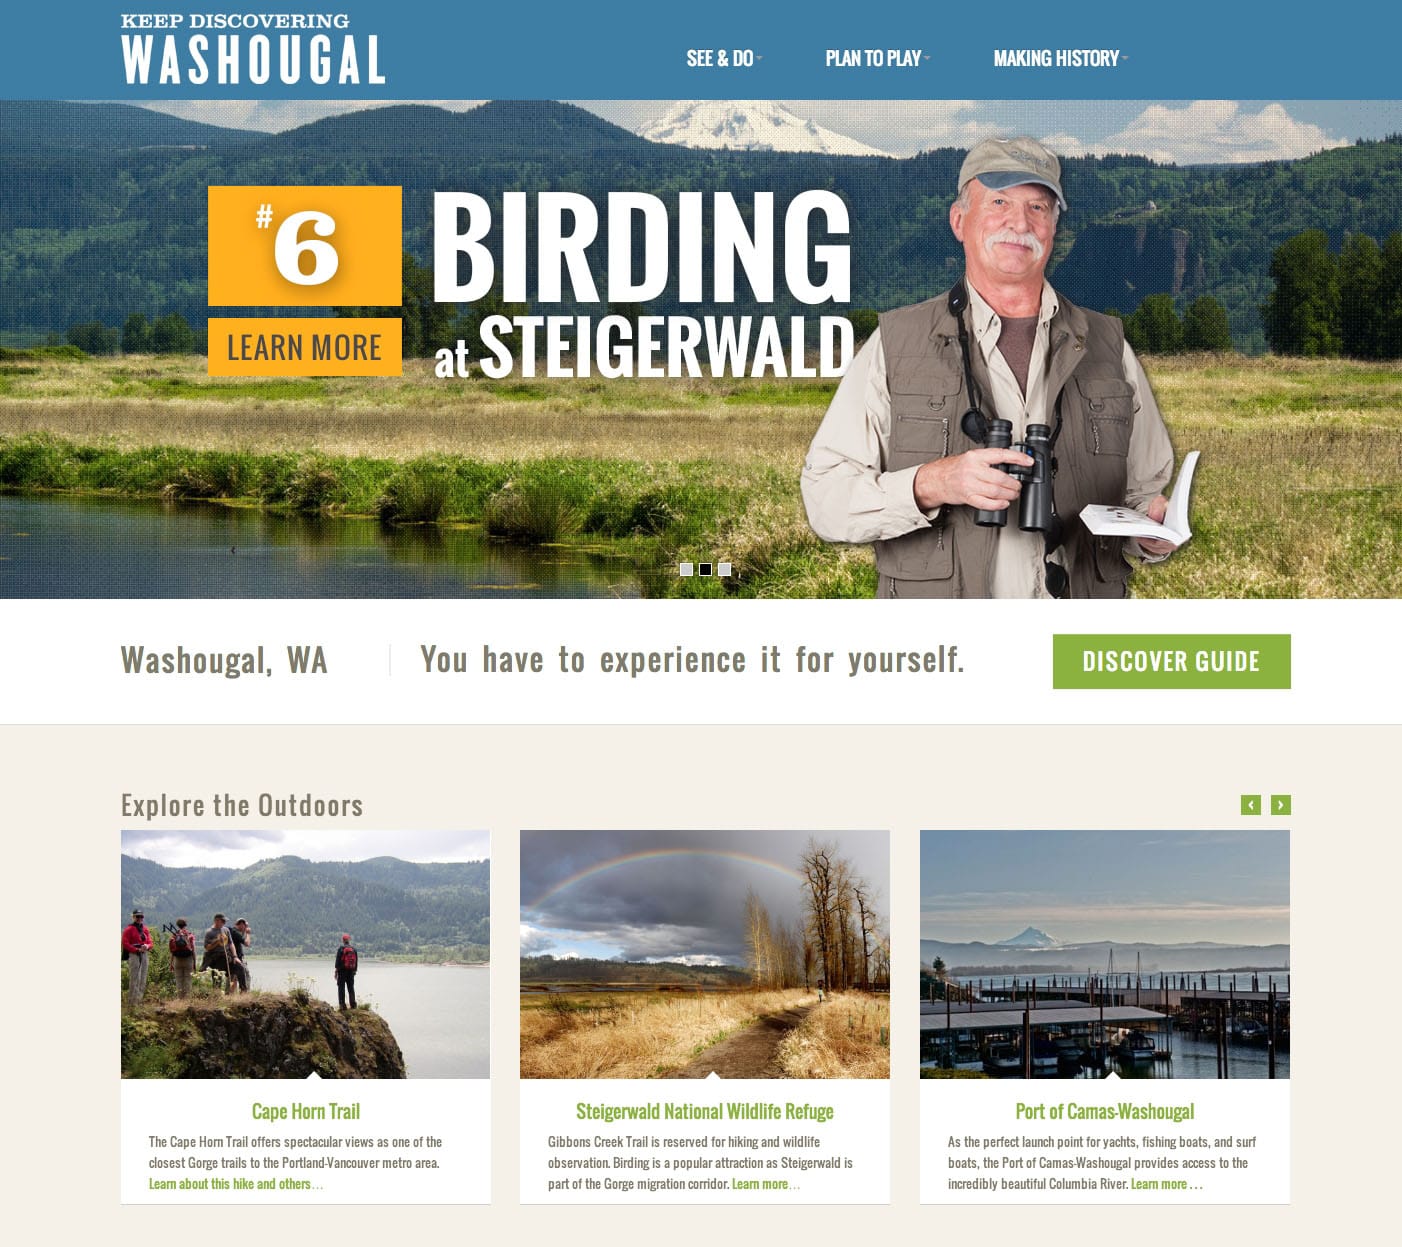 Local bird expert Wilson Cady is among the people featured on a new website, www.visitwashougal.com, that provides visitors with information on what to see and do in Washougal.